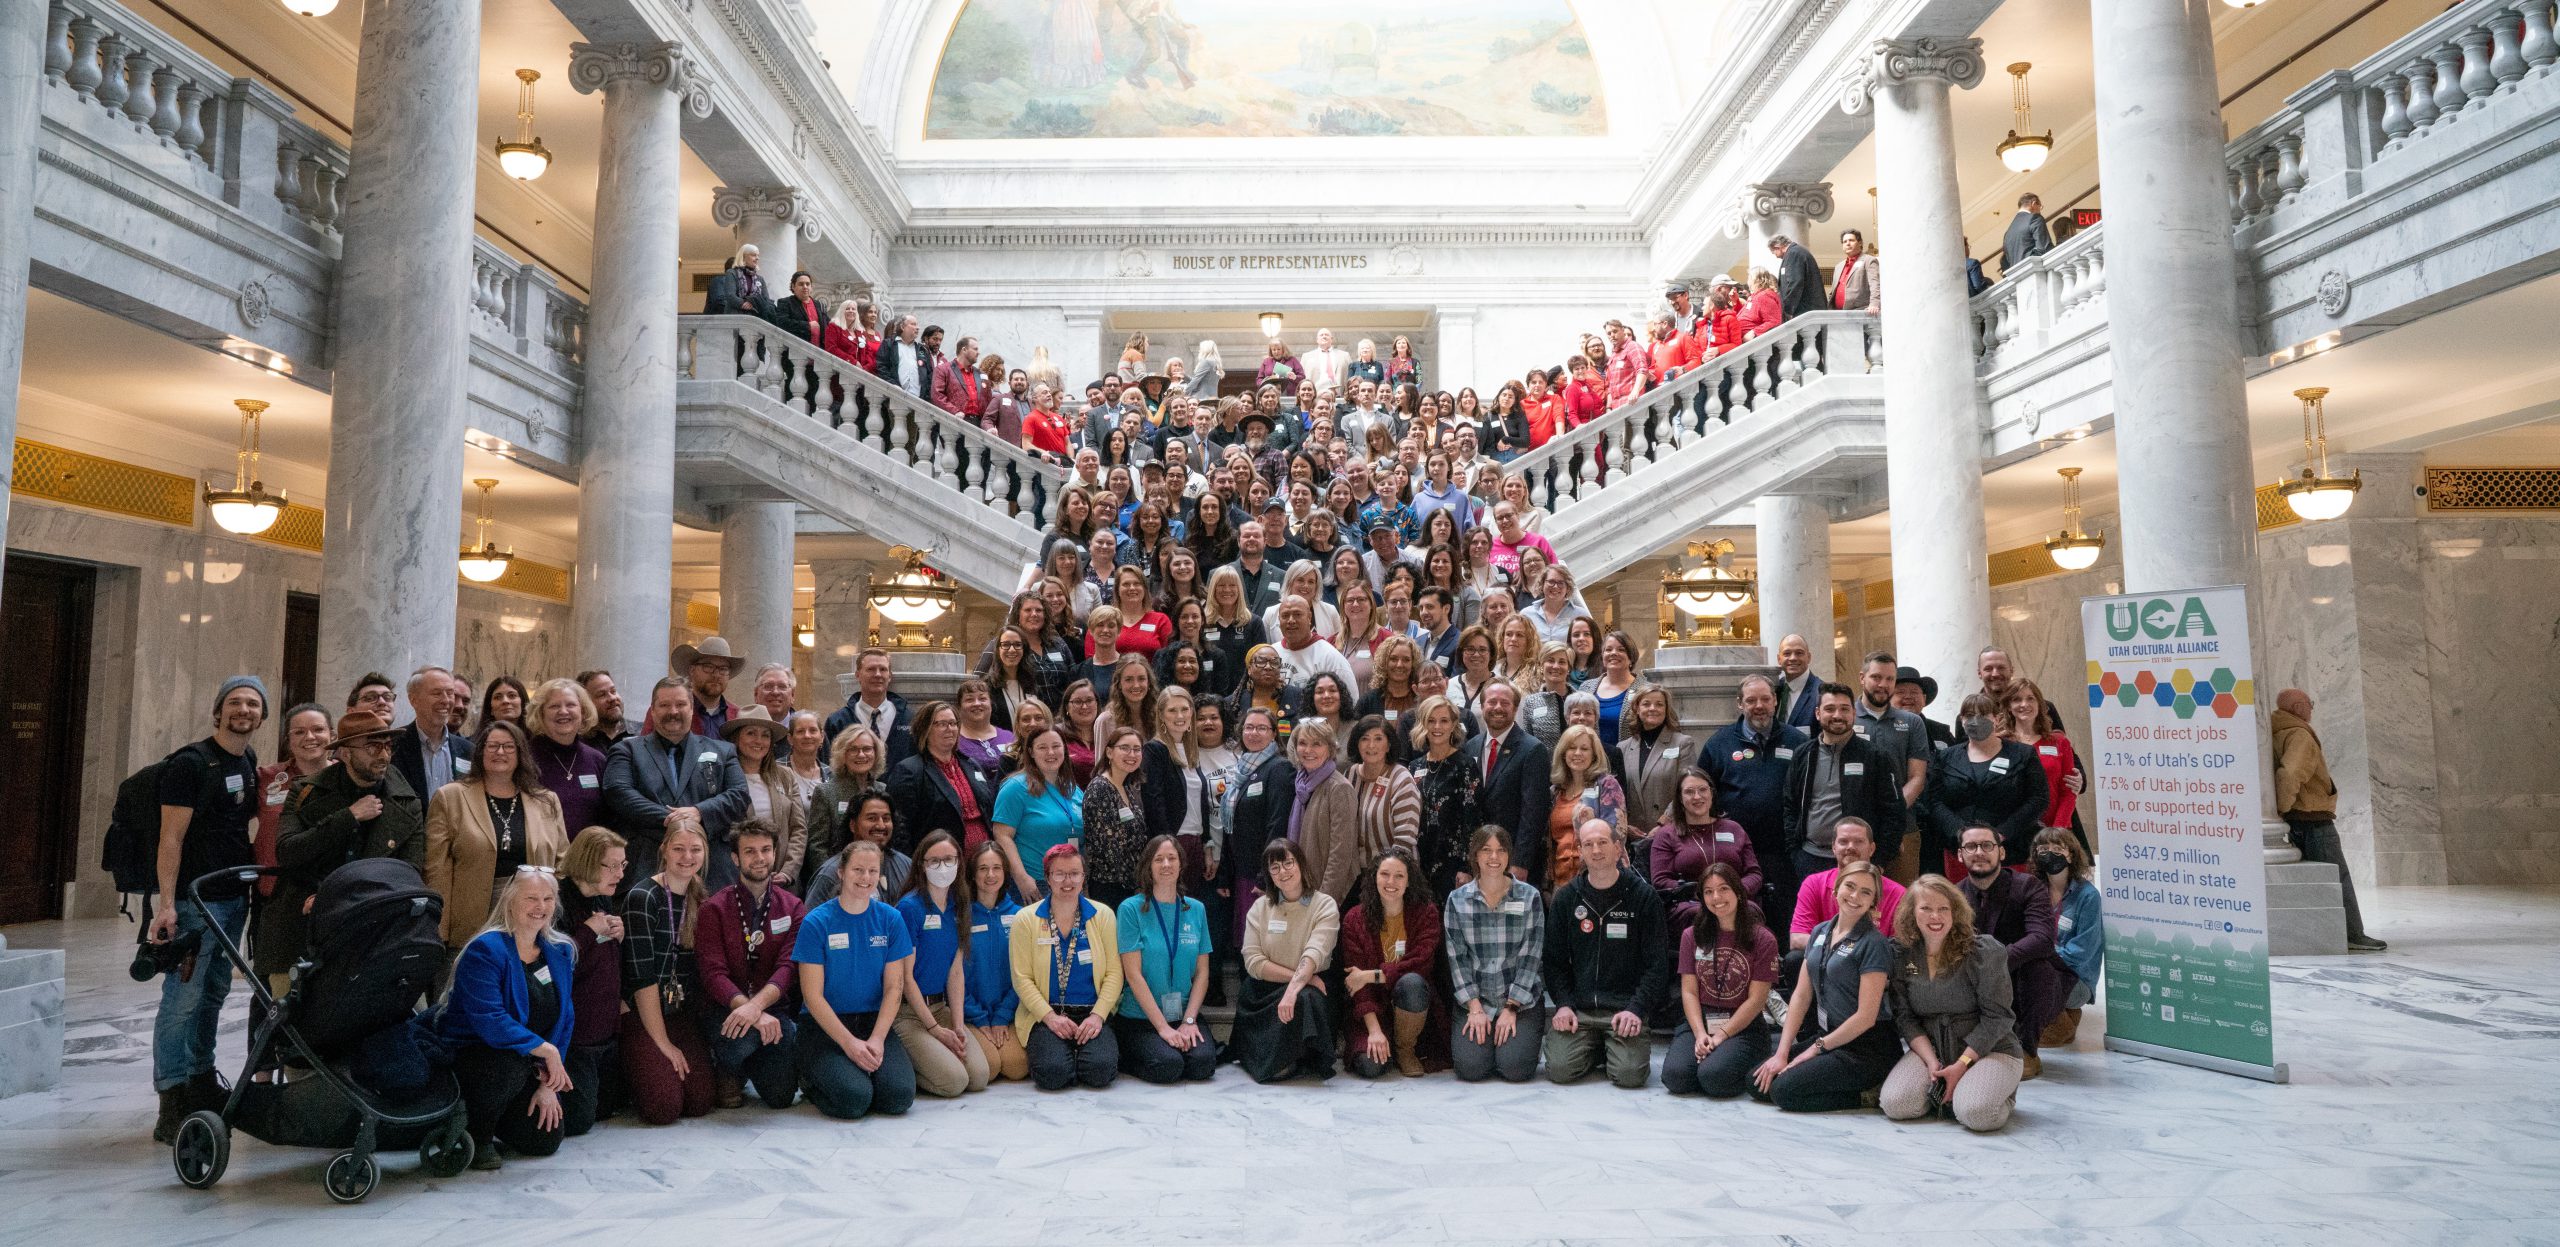 A large group of people smiles for the camera in the Utah State Capitol rotunda.